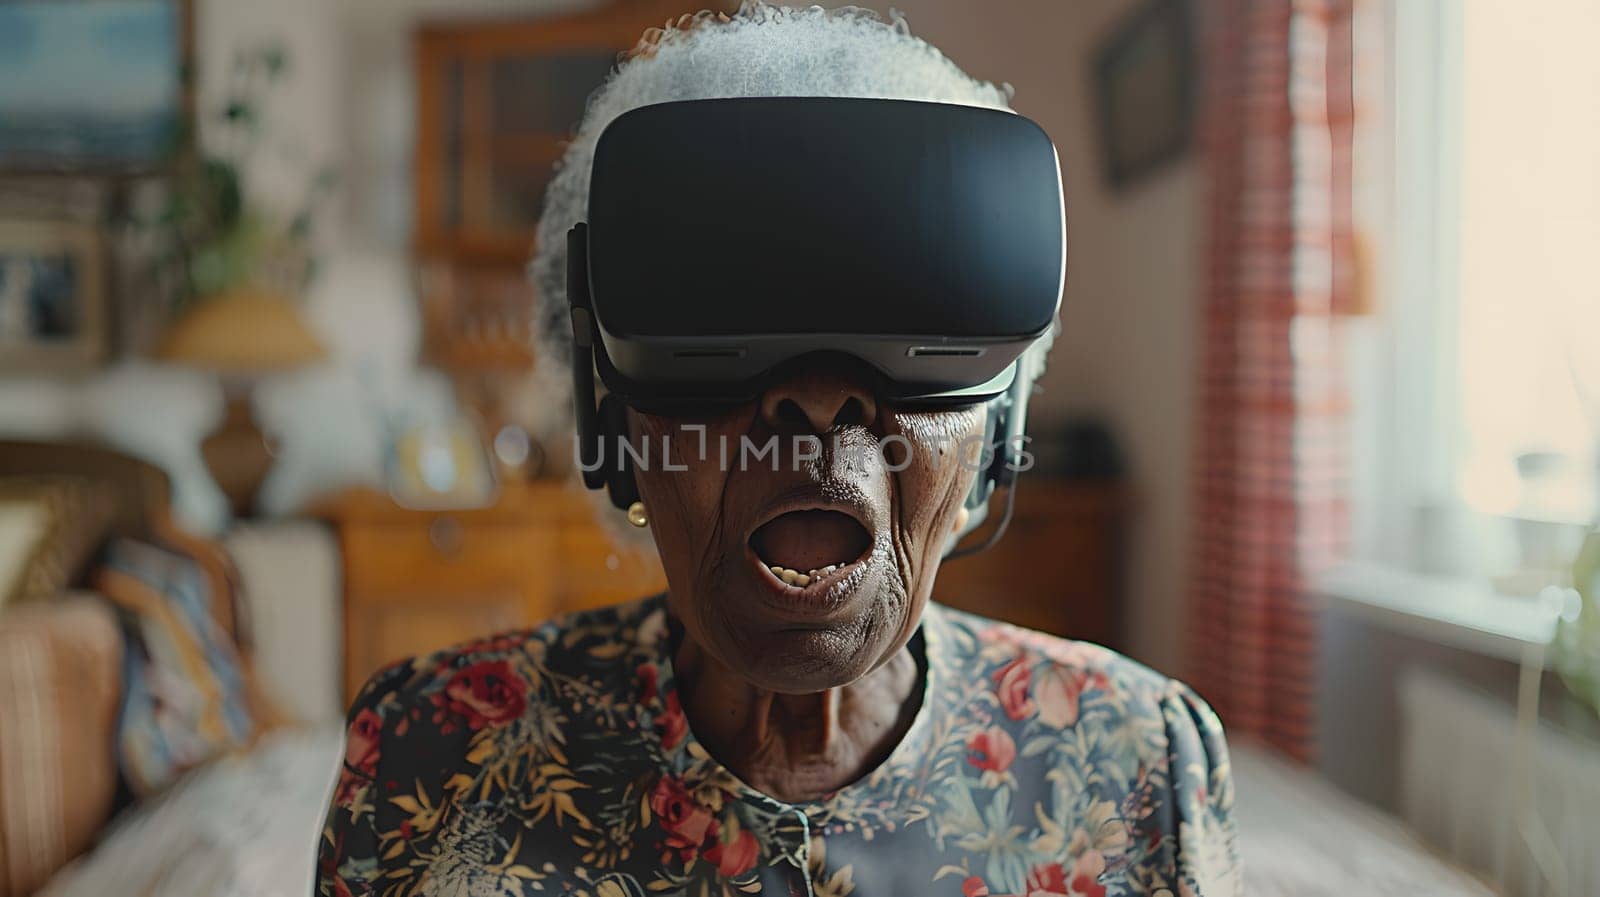 An elderly woman is wearing a virtual reality helmet in a living room, immersed in a fictional event. Her personal protective eyewear reflects the fictional characters facial hair and flesh